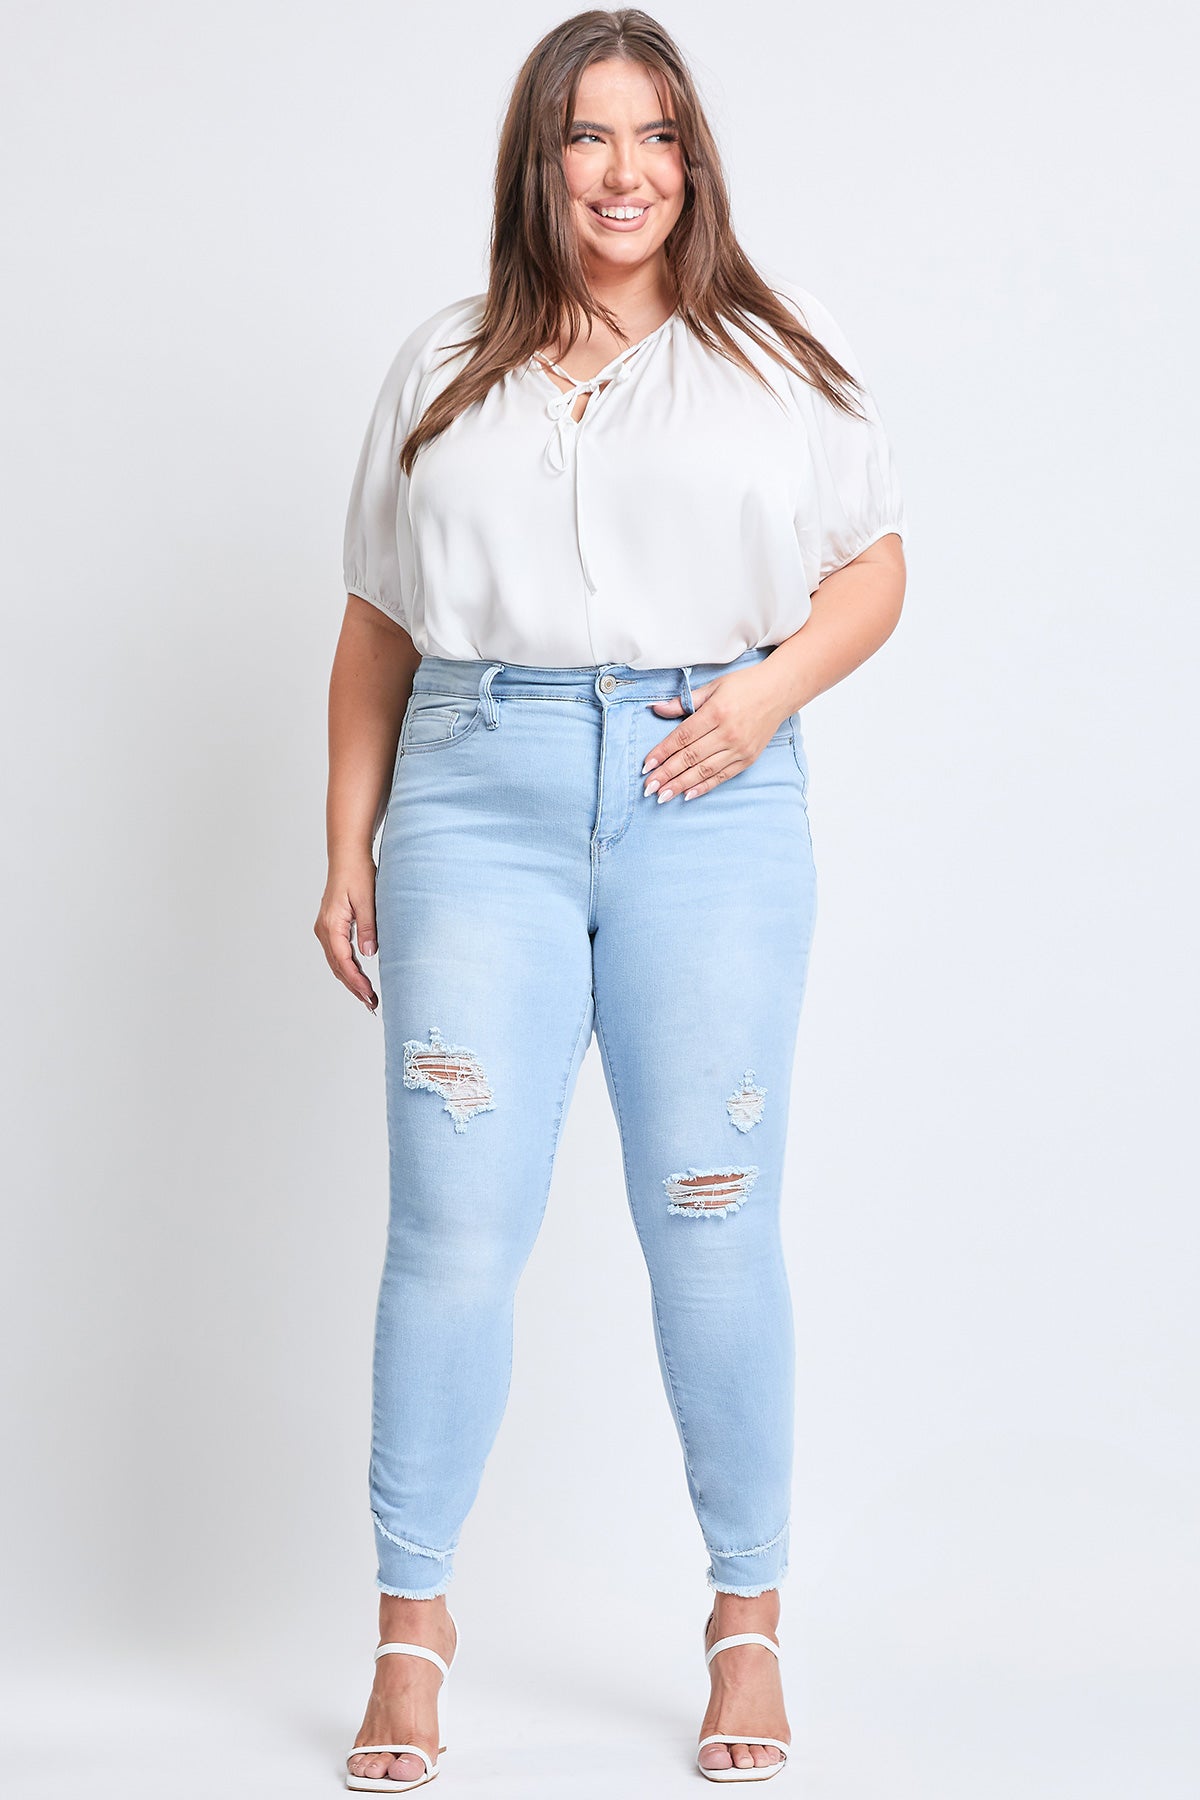 Women's Plus Size Sustainable High Rise Skinny Ankle Jeans